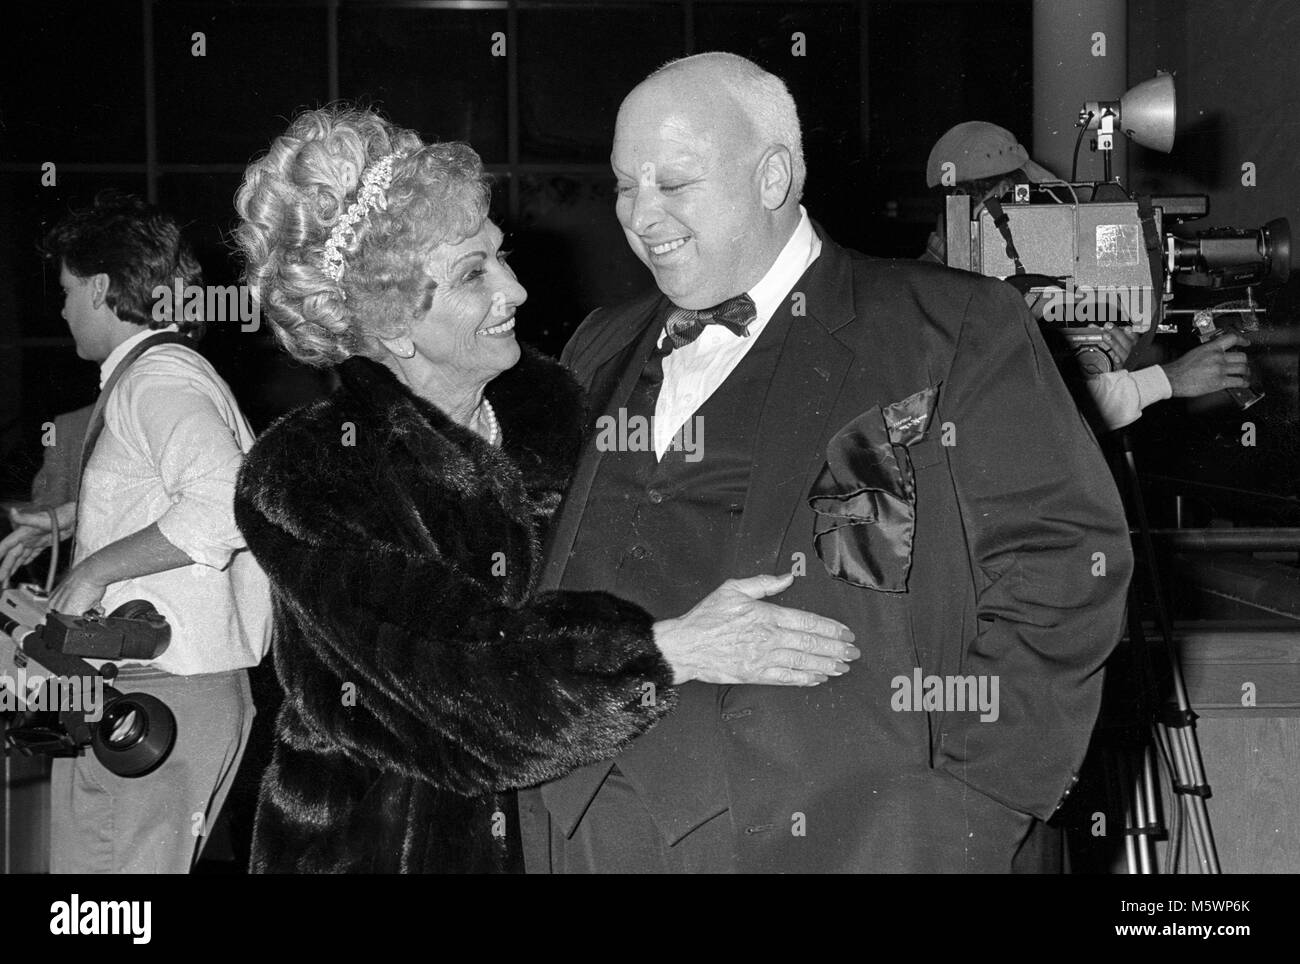 Baltimore, MD 2-16-1988 (file photo) Divine (Harris Glen Milstead) gets a hug from his mother, Diane, 'Frances' Milsteadu at the premiere of the orginial movie, 'Hairspray'.  This was the first time that Divine and his mother had been together in ten years.  Divine died six weeks after the premiere.  Photo by Patsy Lynch/ MediaPunch   All rights reserved Stock Photo